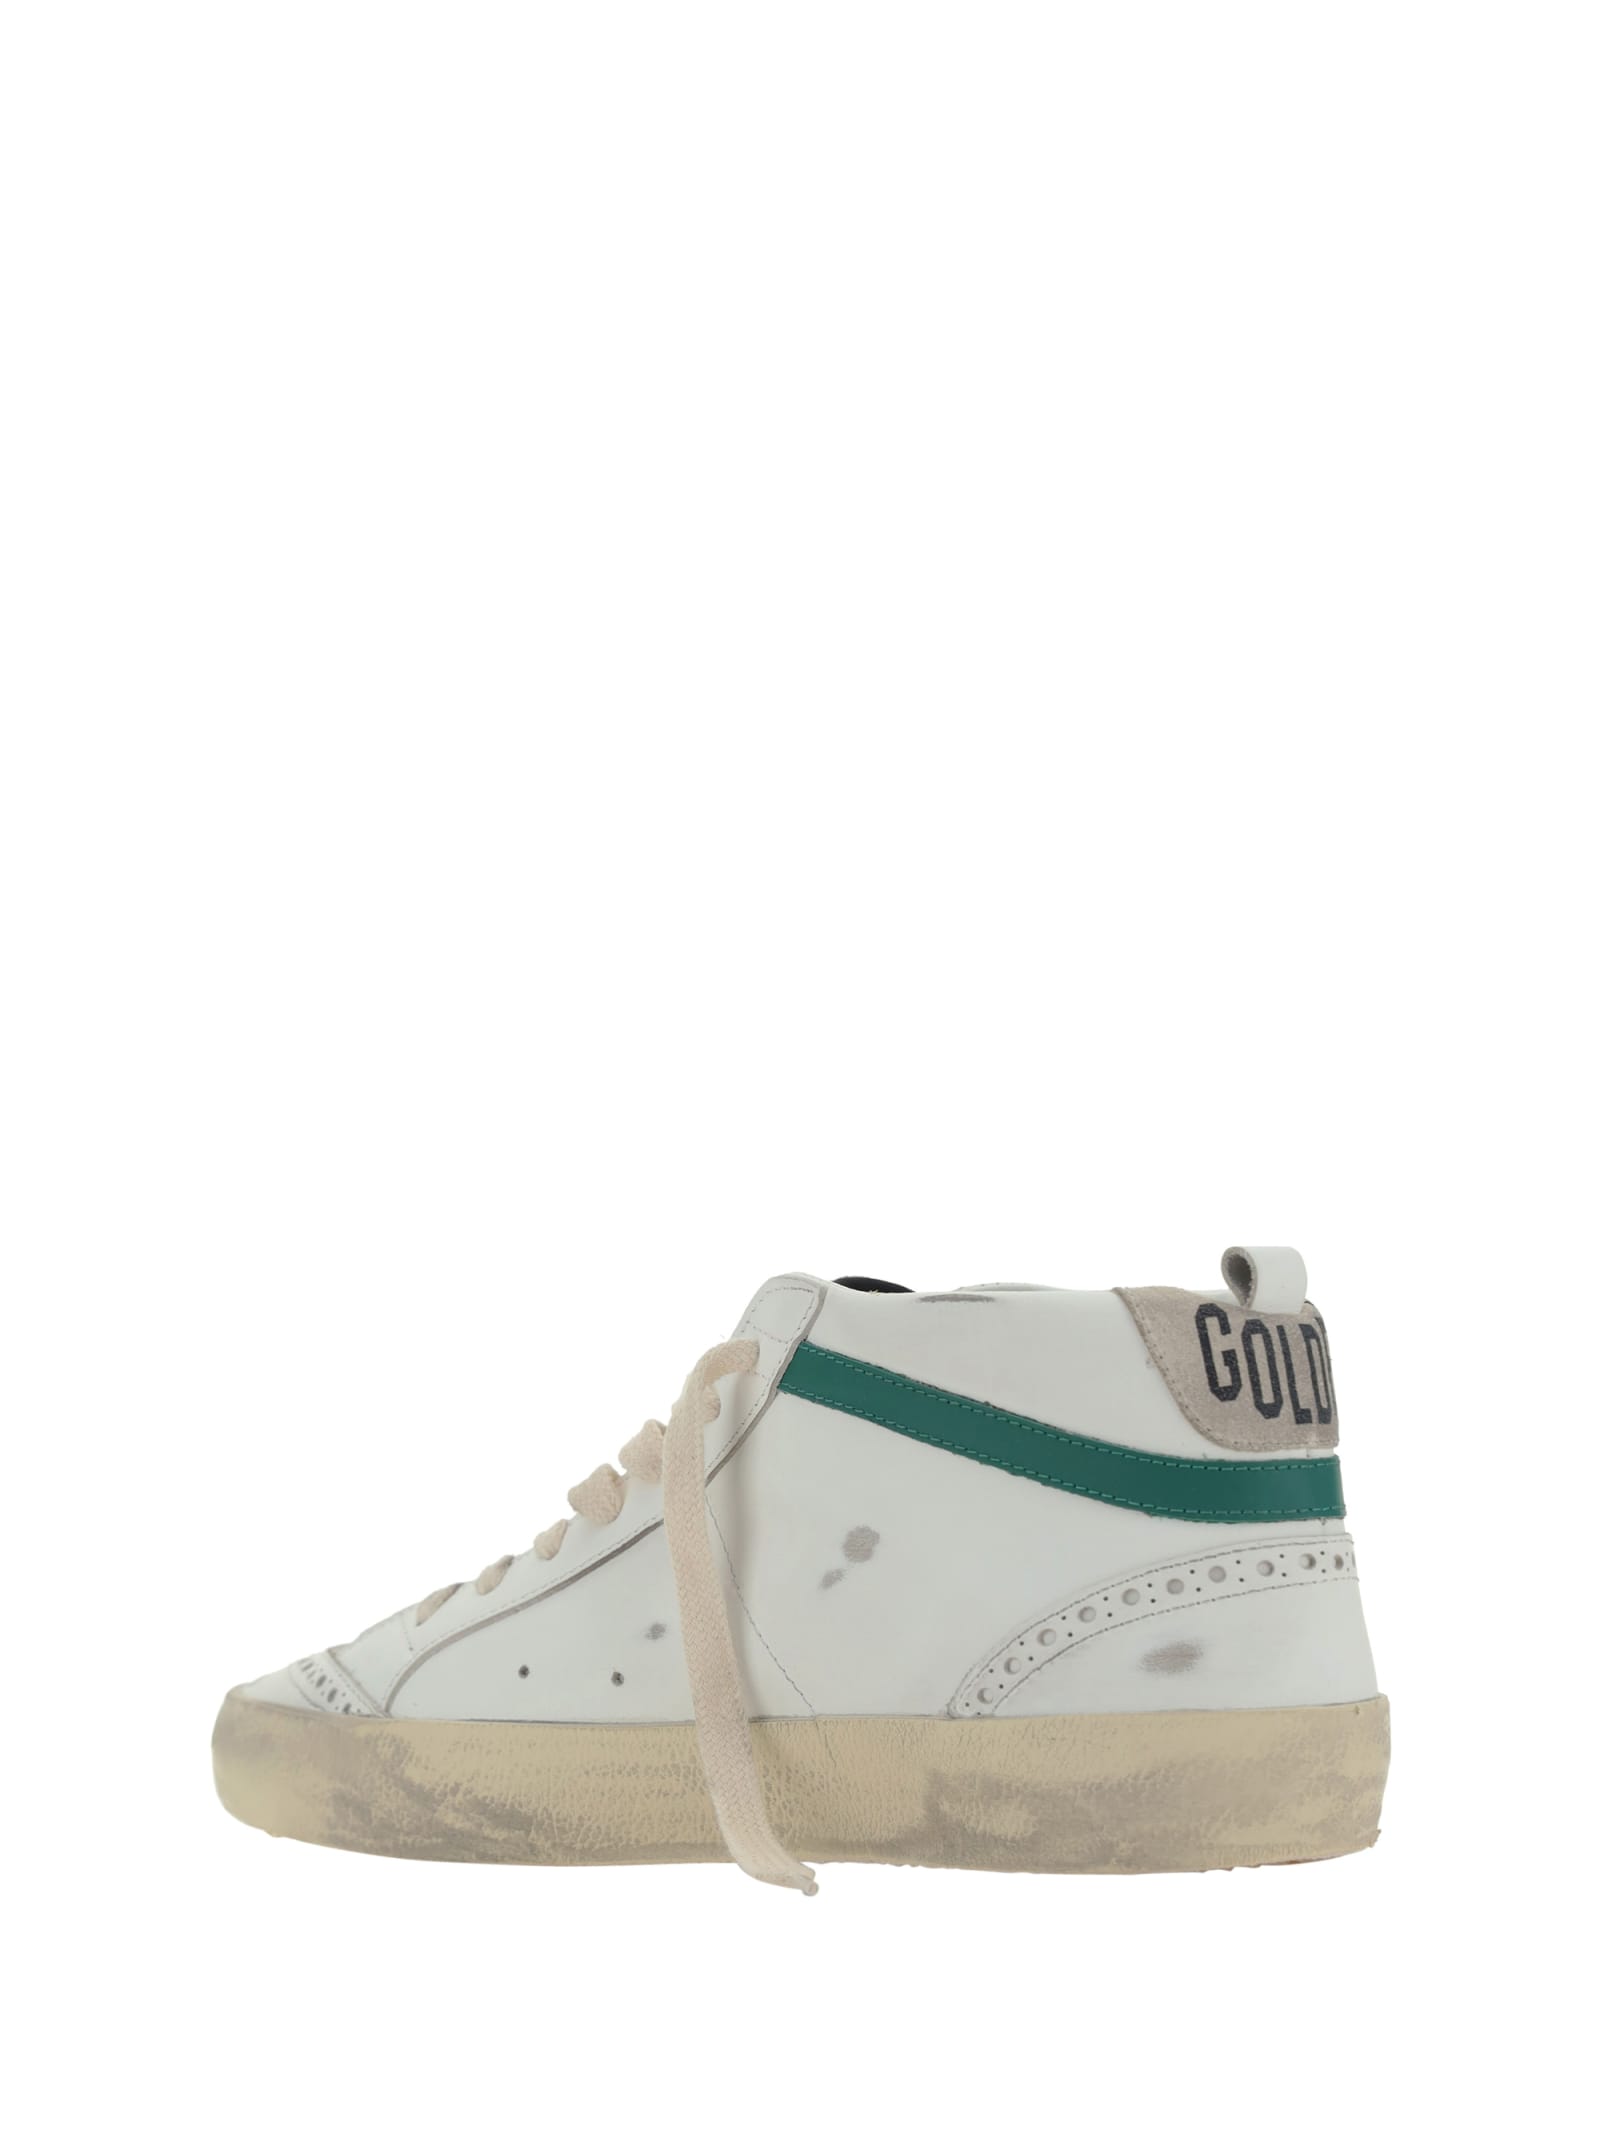 Shop Golden Goose Mid Star Sneakers In White/seedpearl/silver/green